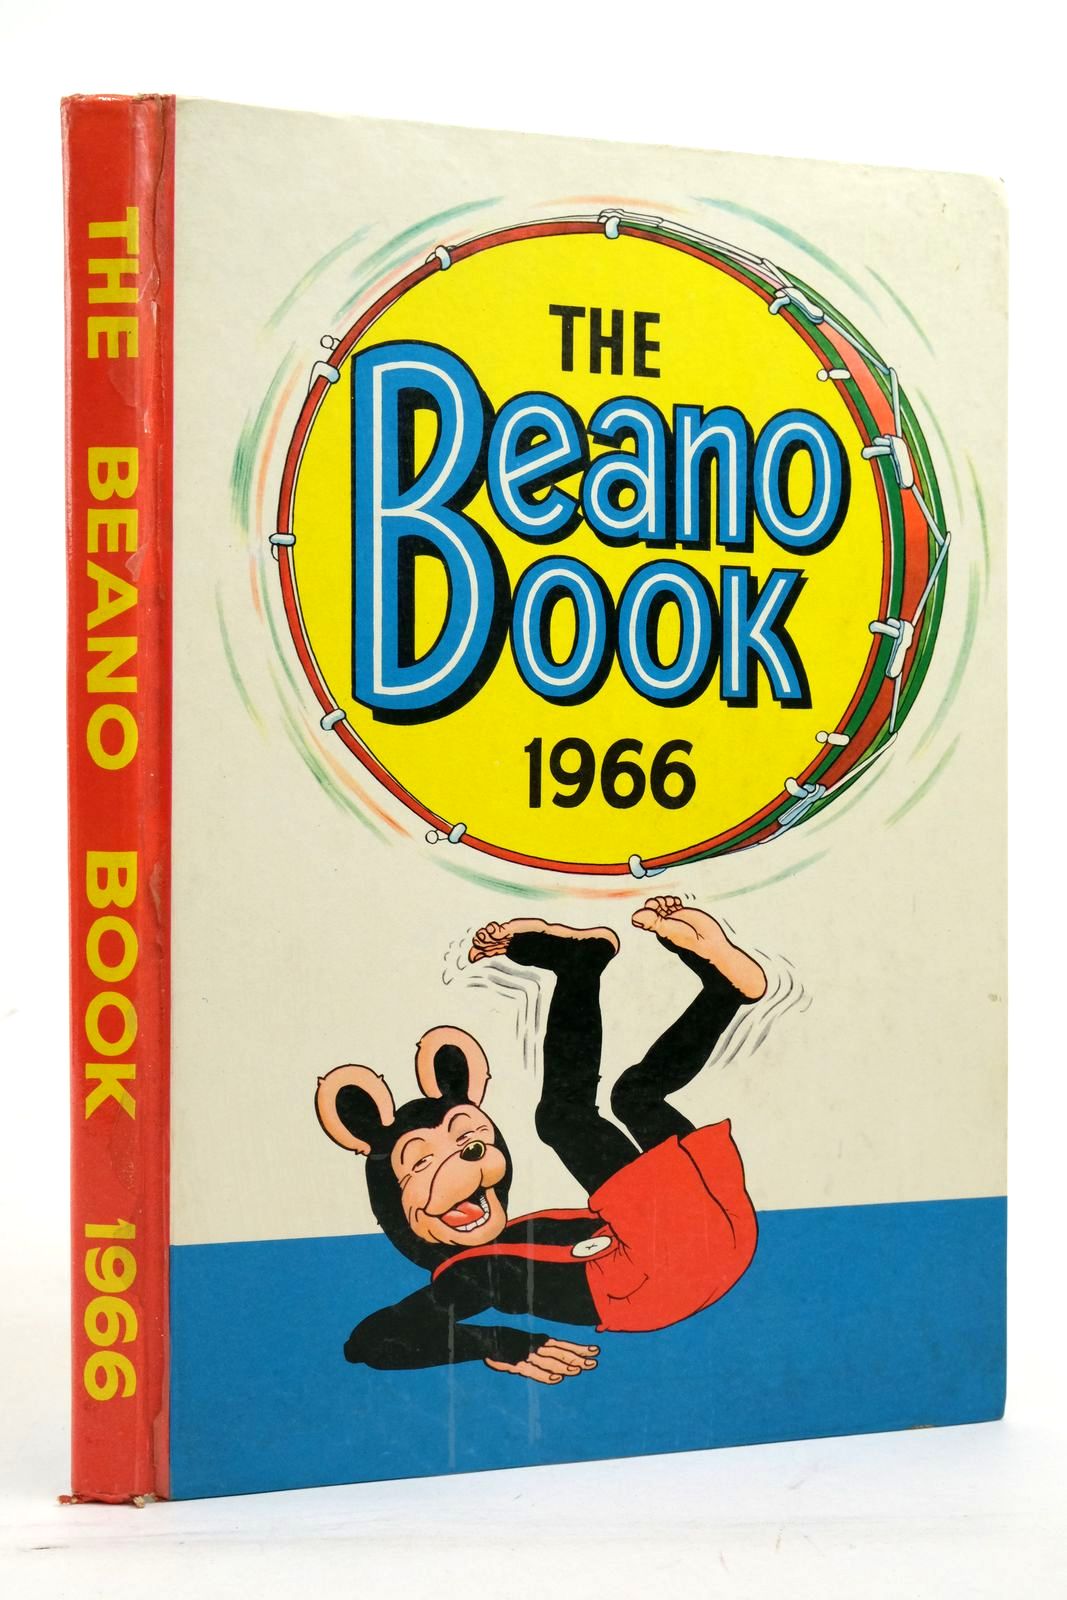 Photo of THE BEANO BOOK 1966 published by D.C. Thomson & Co Ltd. (STOCK CODE: 2137950)  for sale by Stella & Rose's Books